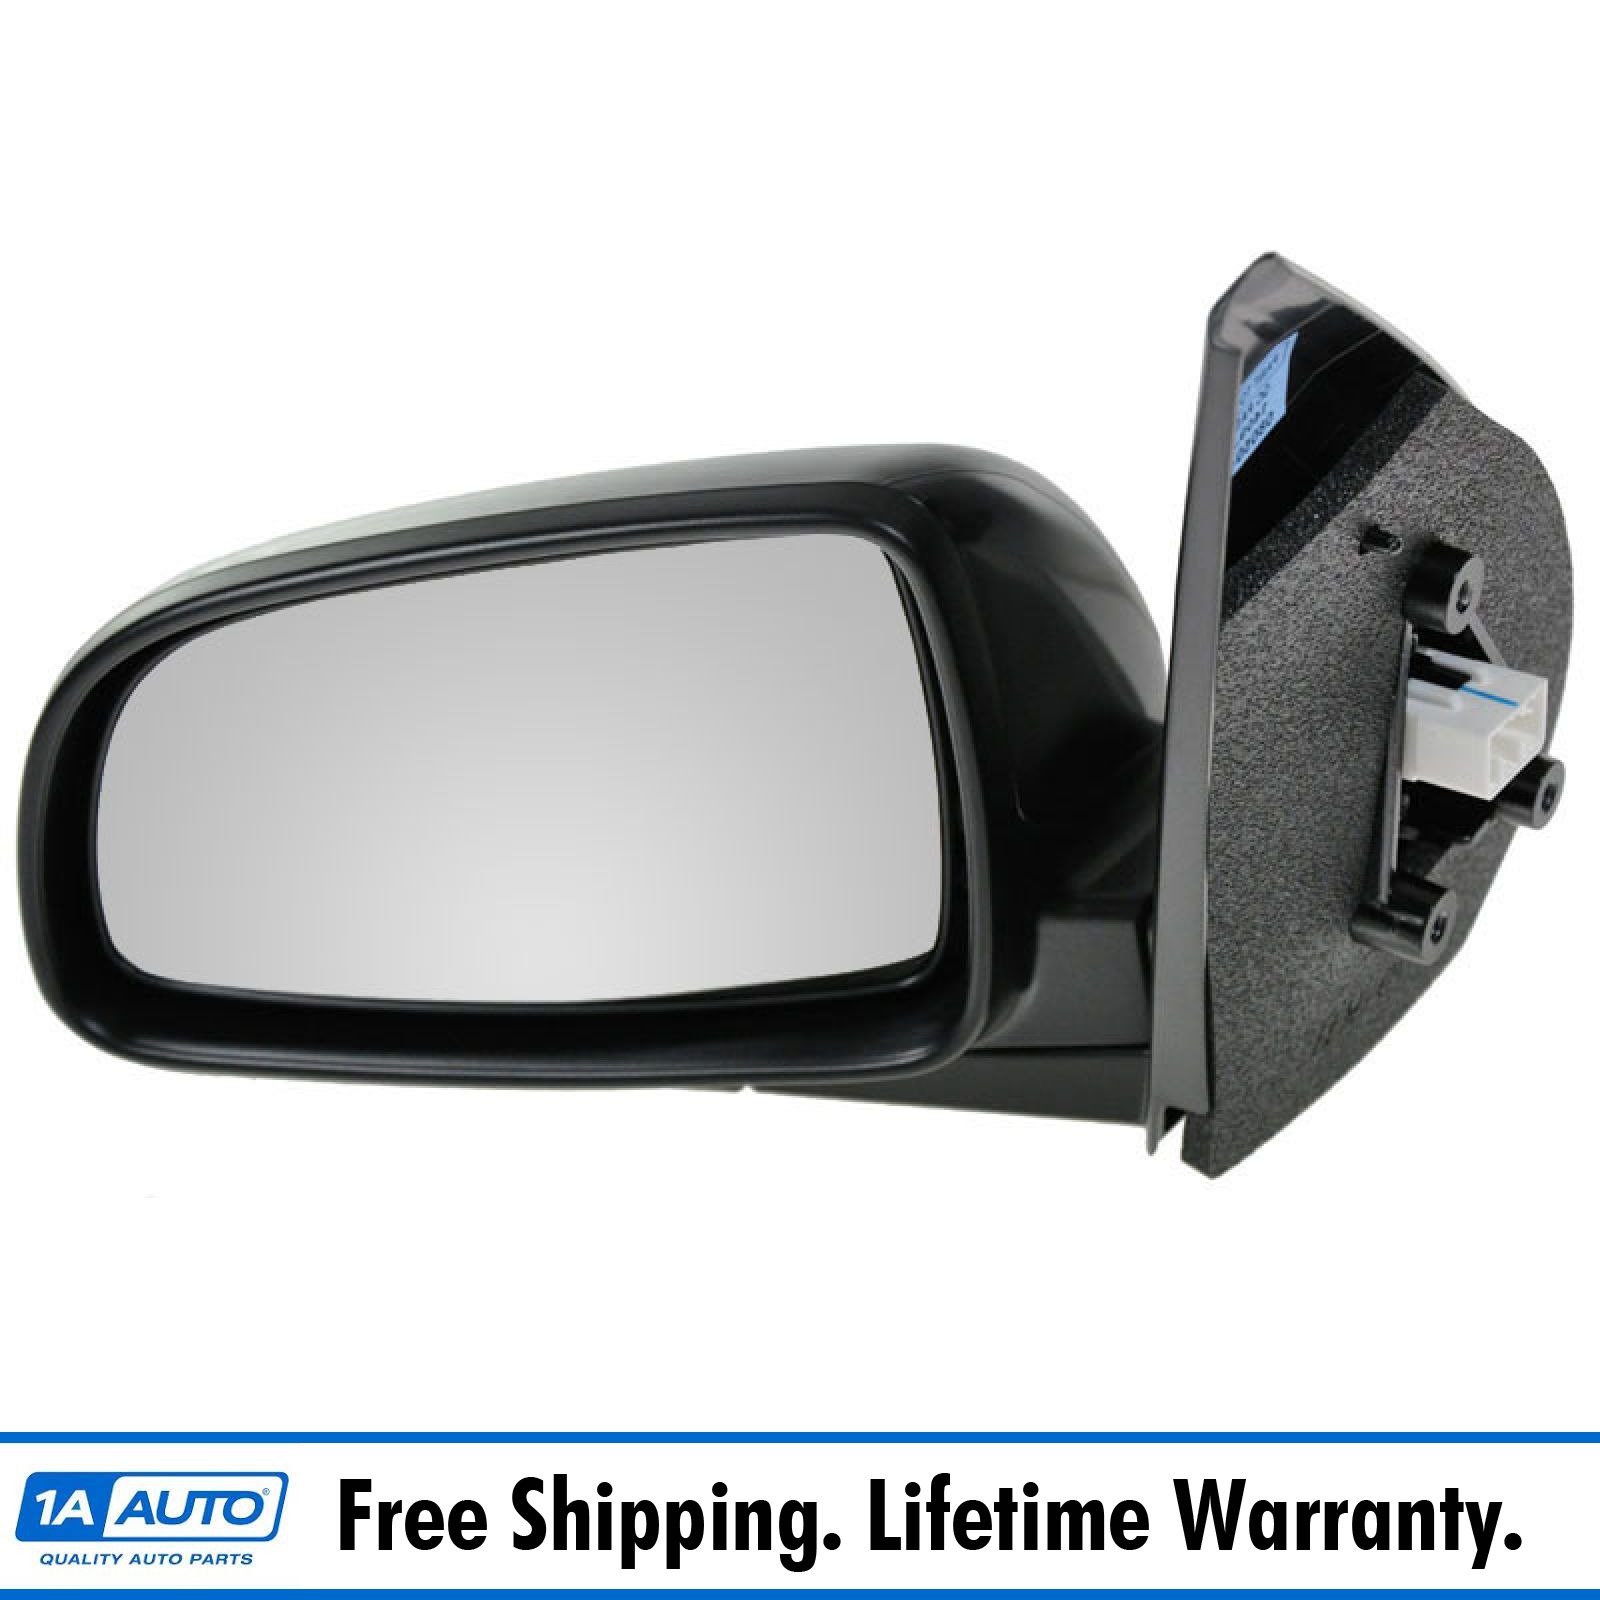 Details About Power Heated Mirror Left Lh Driver Side For Chevy Aveo 4dr